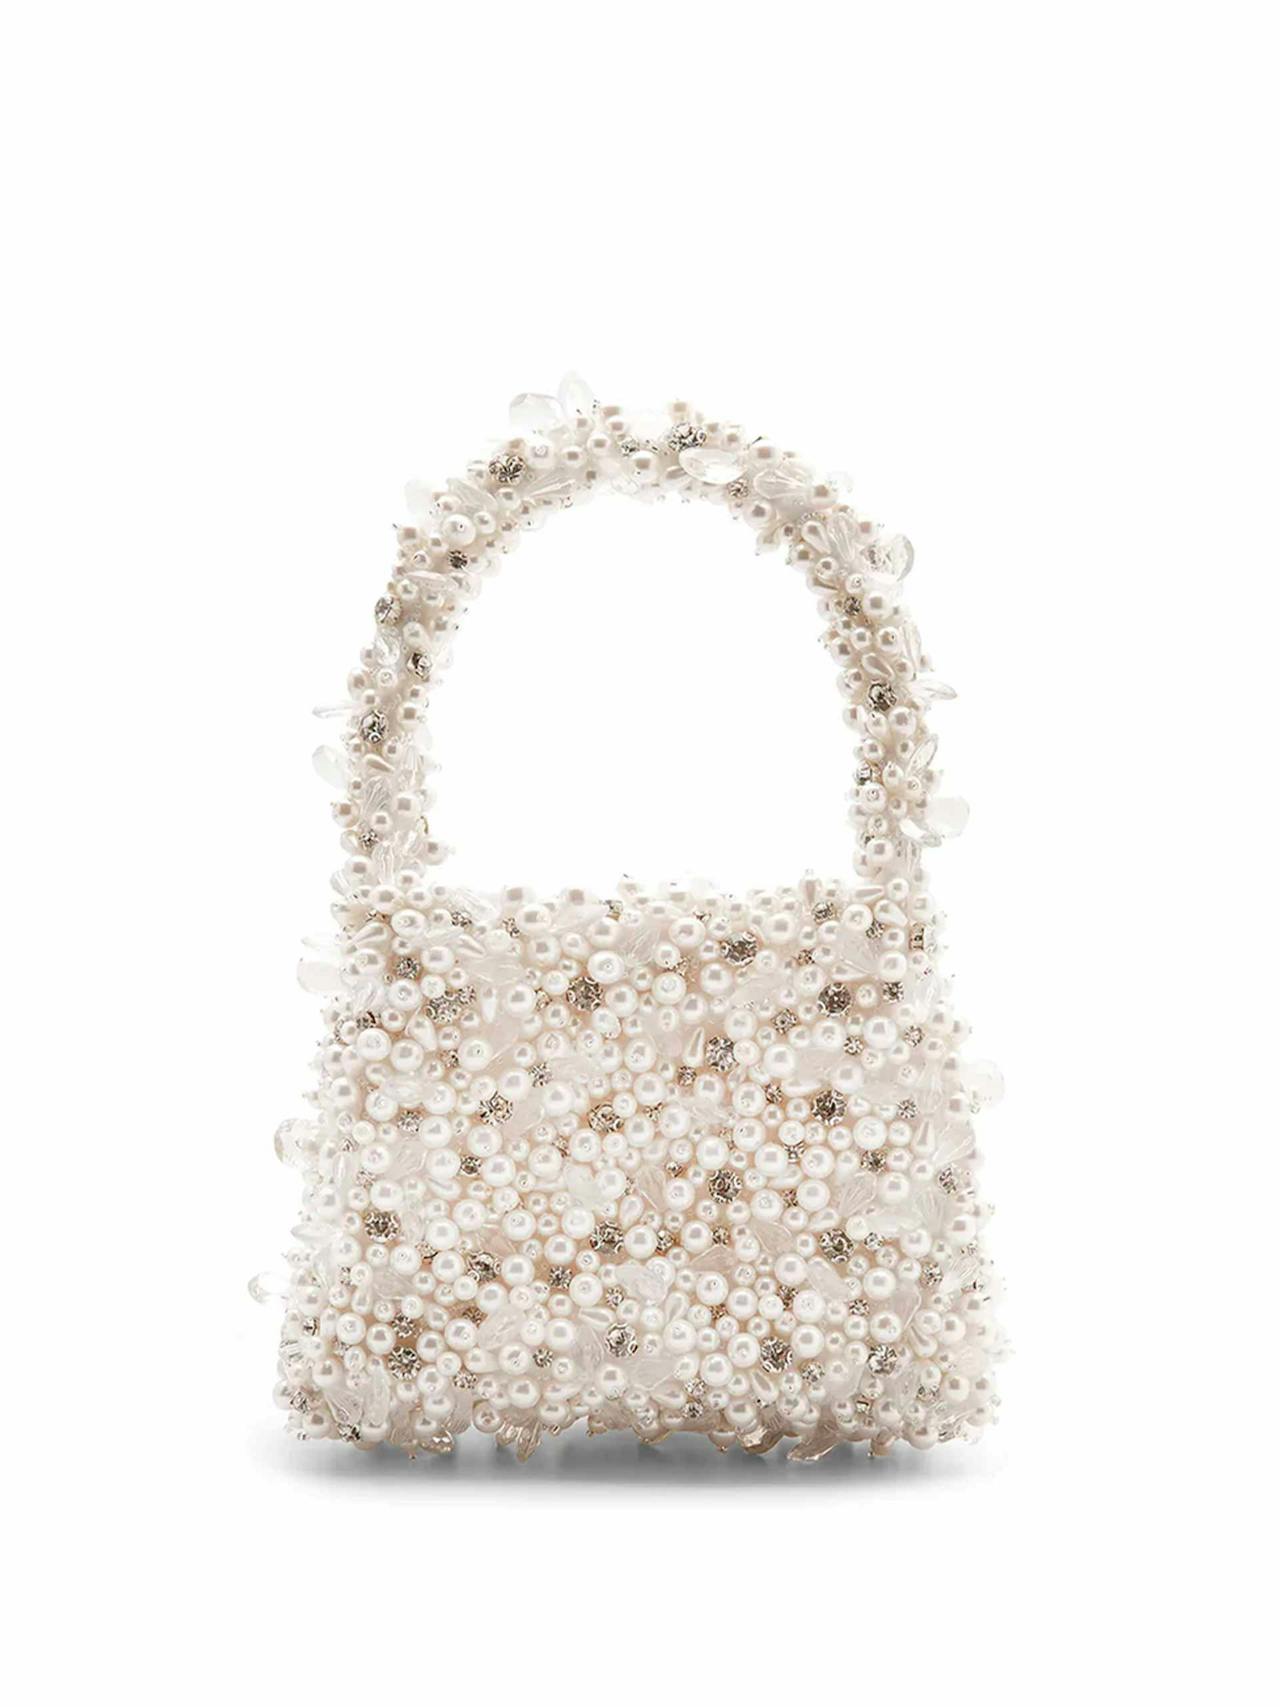 White crystal and pearl bag